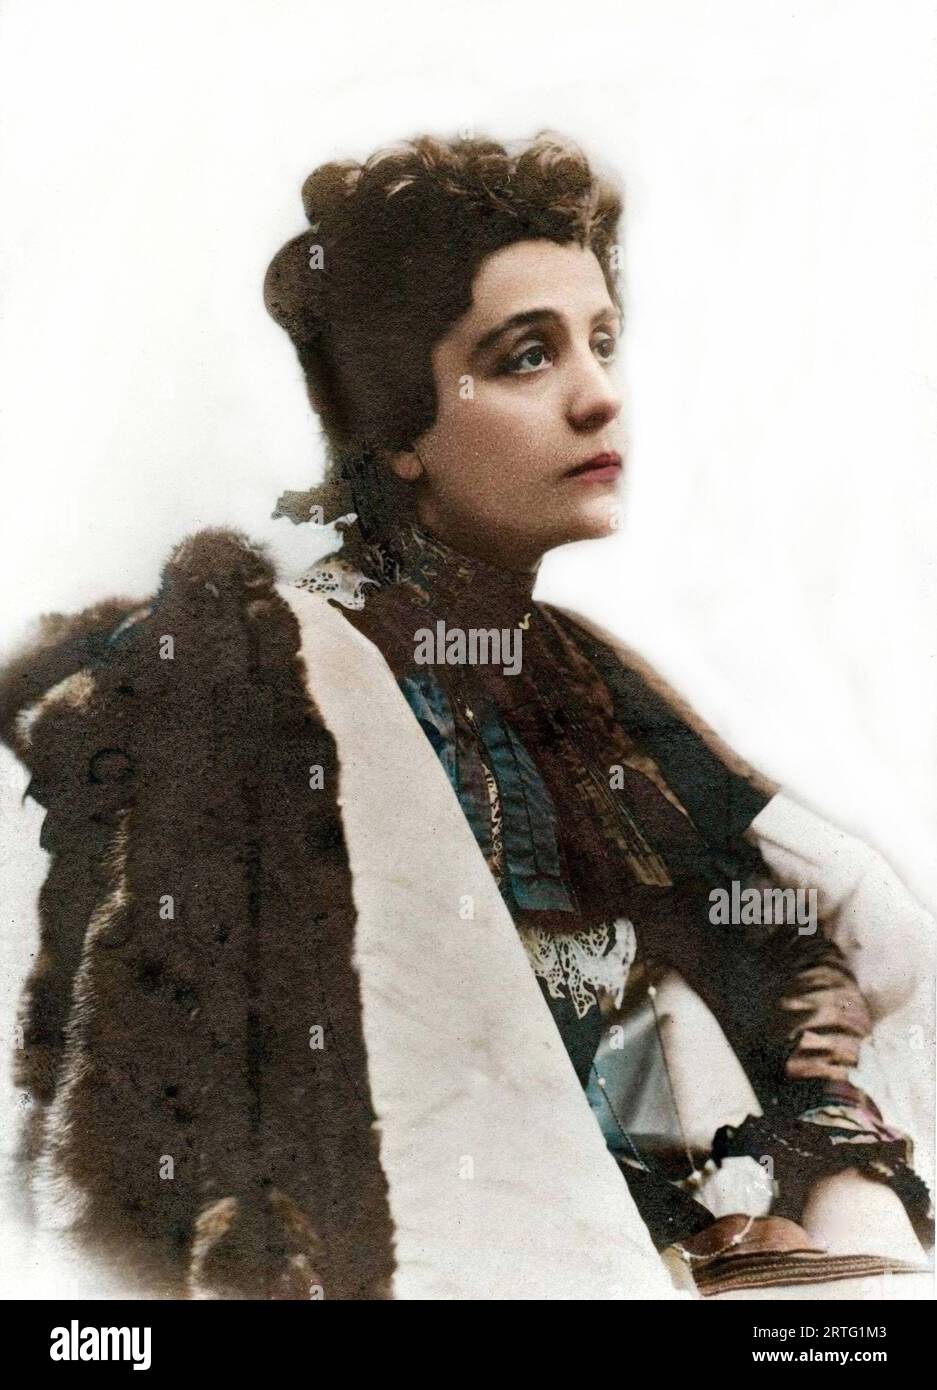 Portrait of Eleonora Duse (1858-1924), known as 'La Duse'- Early 20th century. Stock Photo